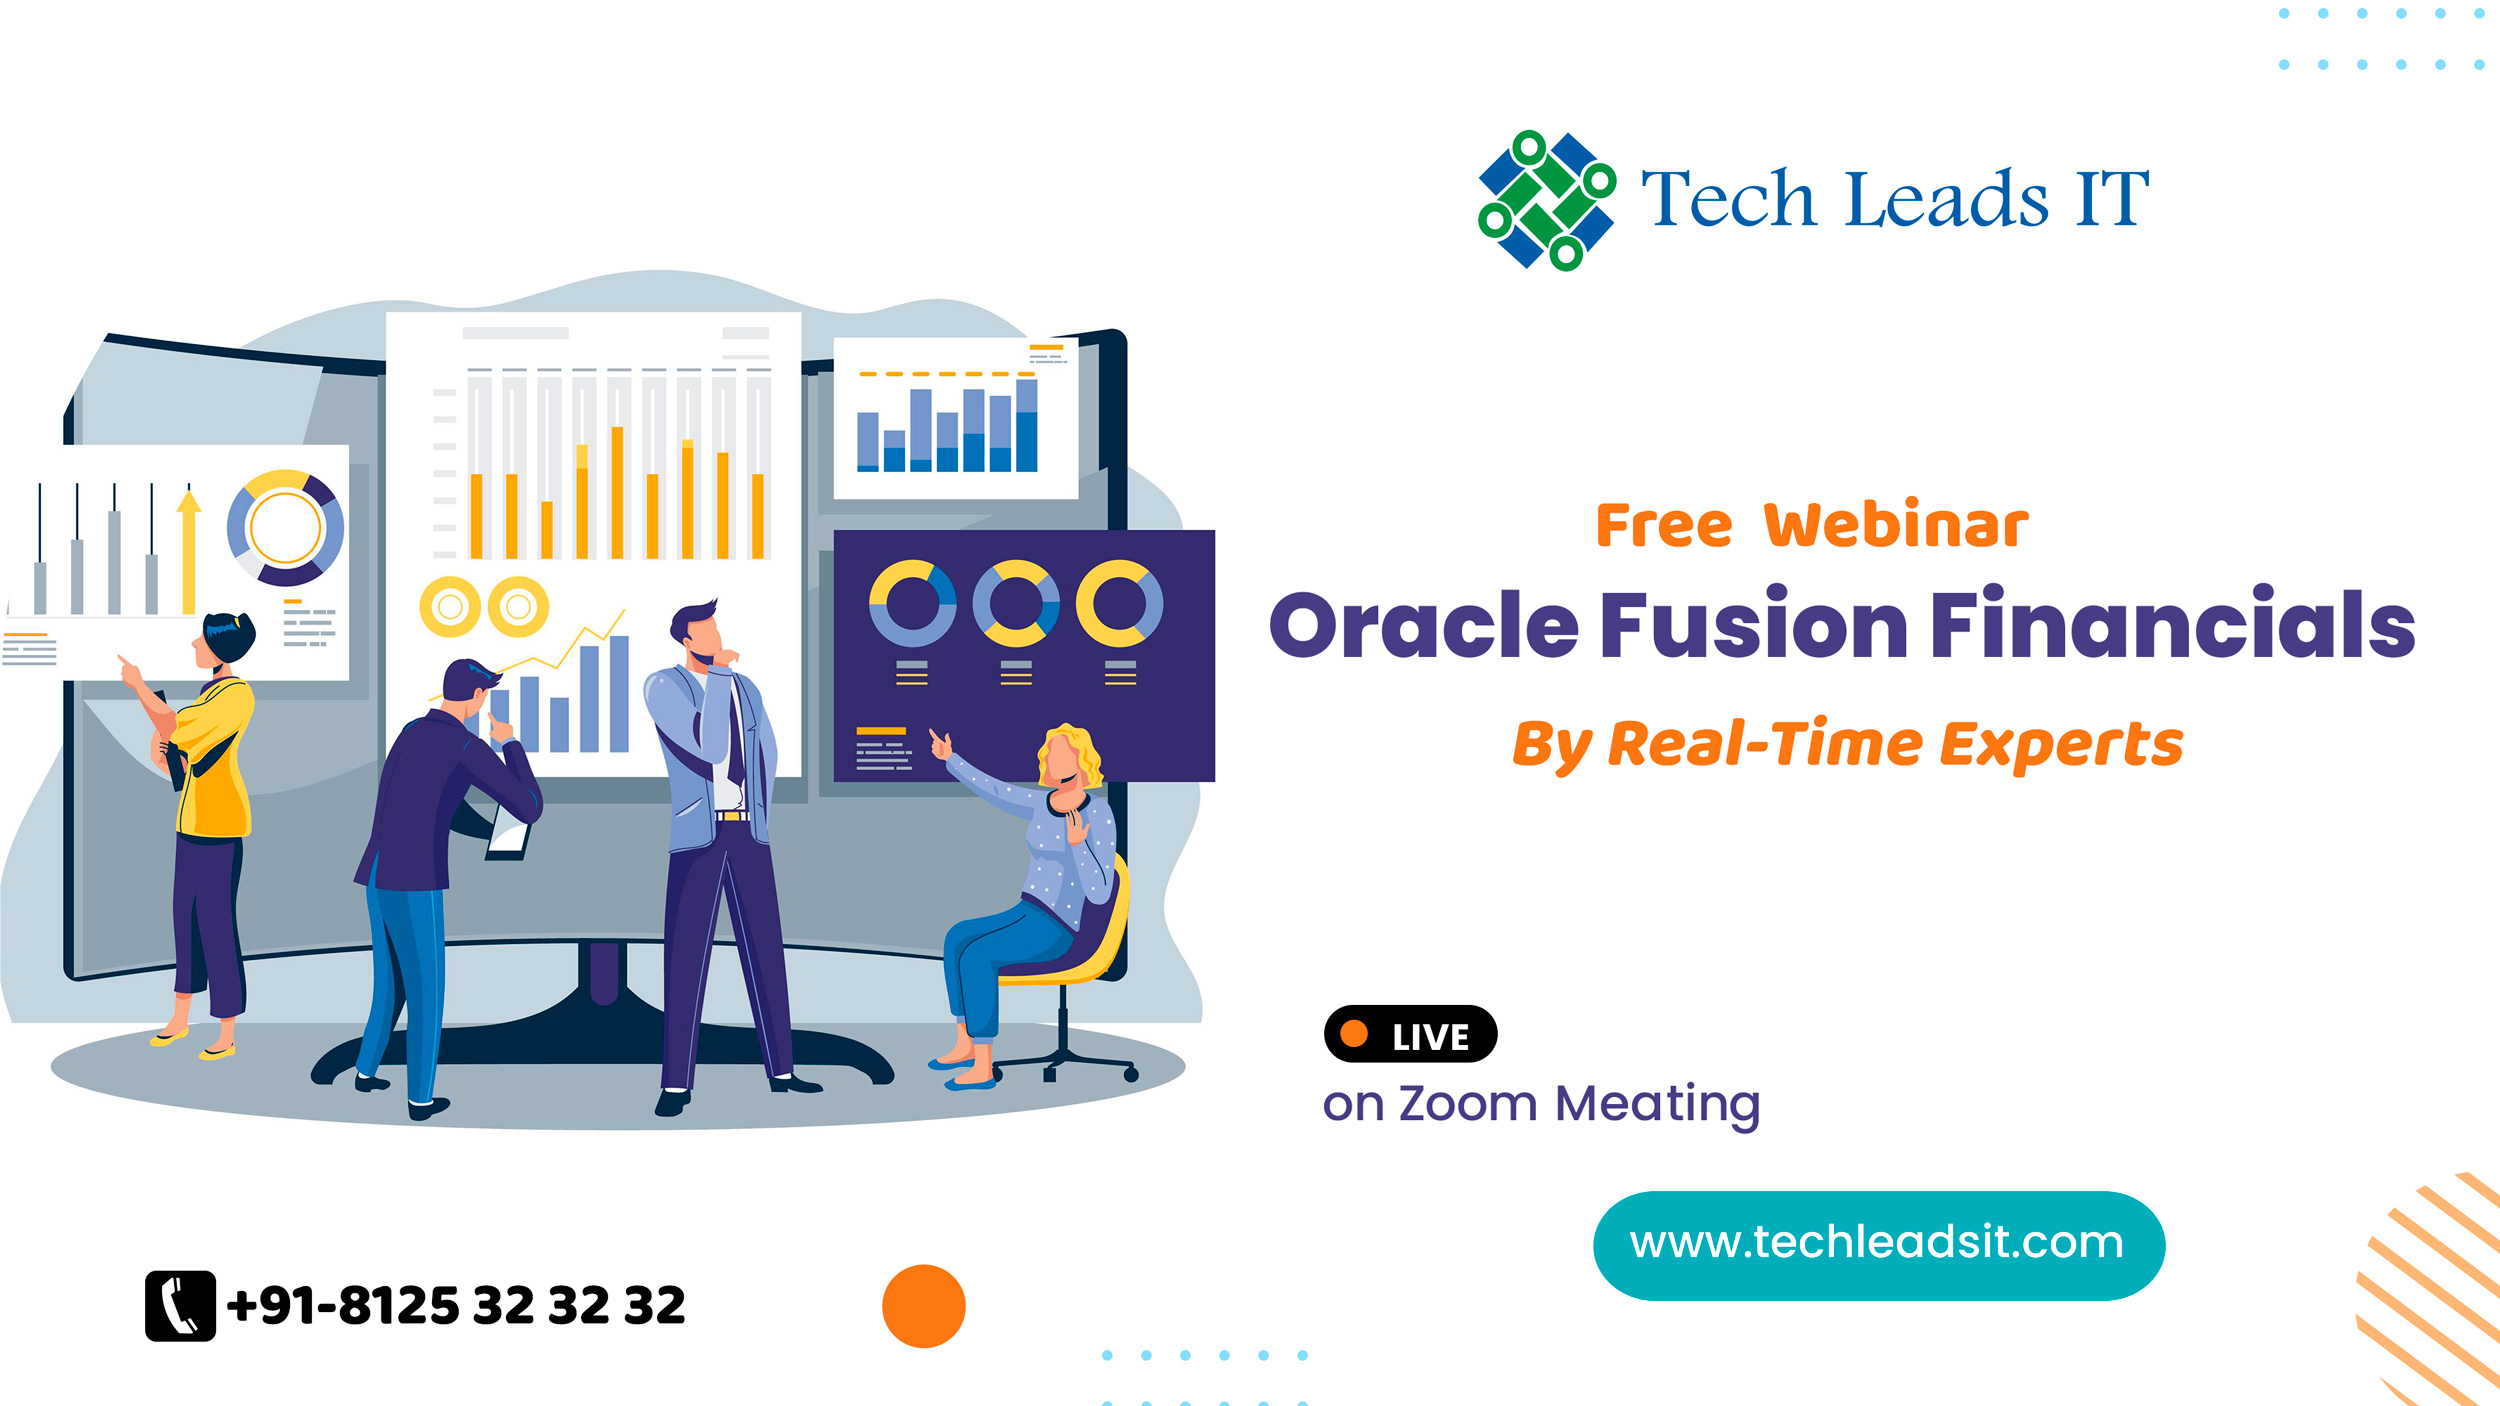 Oracle Fusion Financials Online Training Free Webinar, Online Event